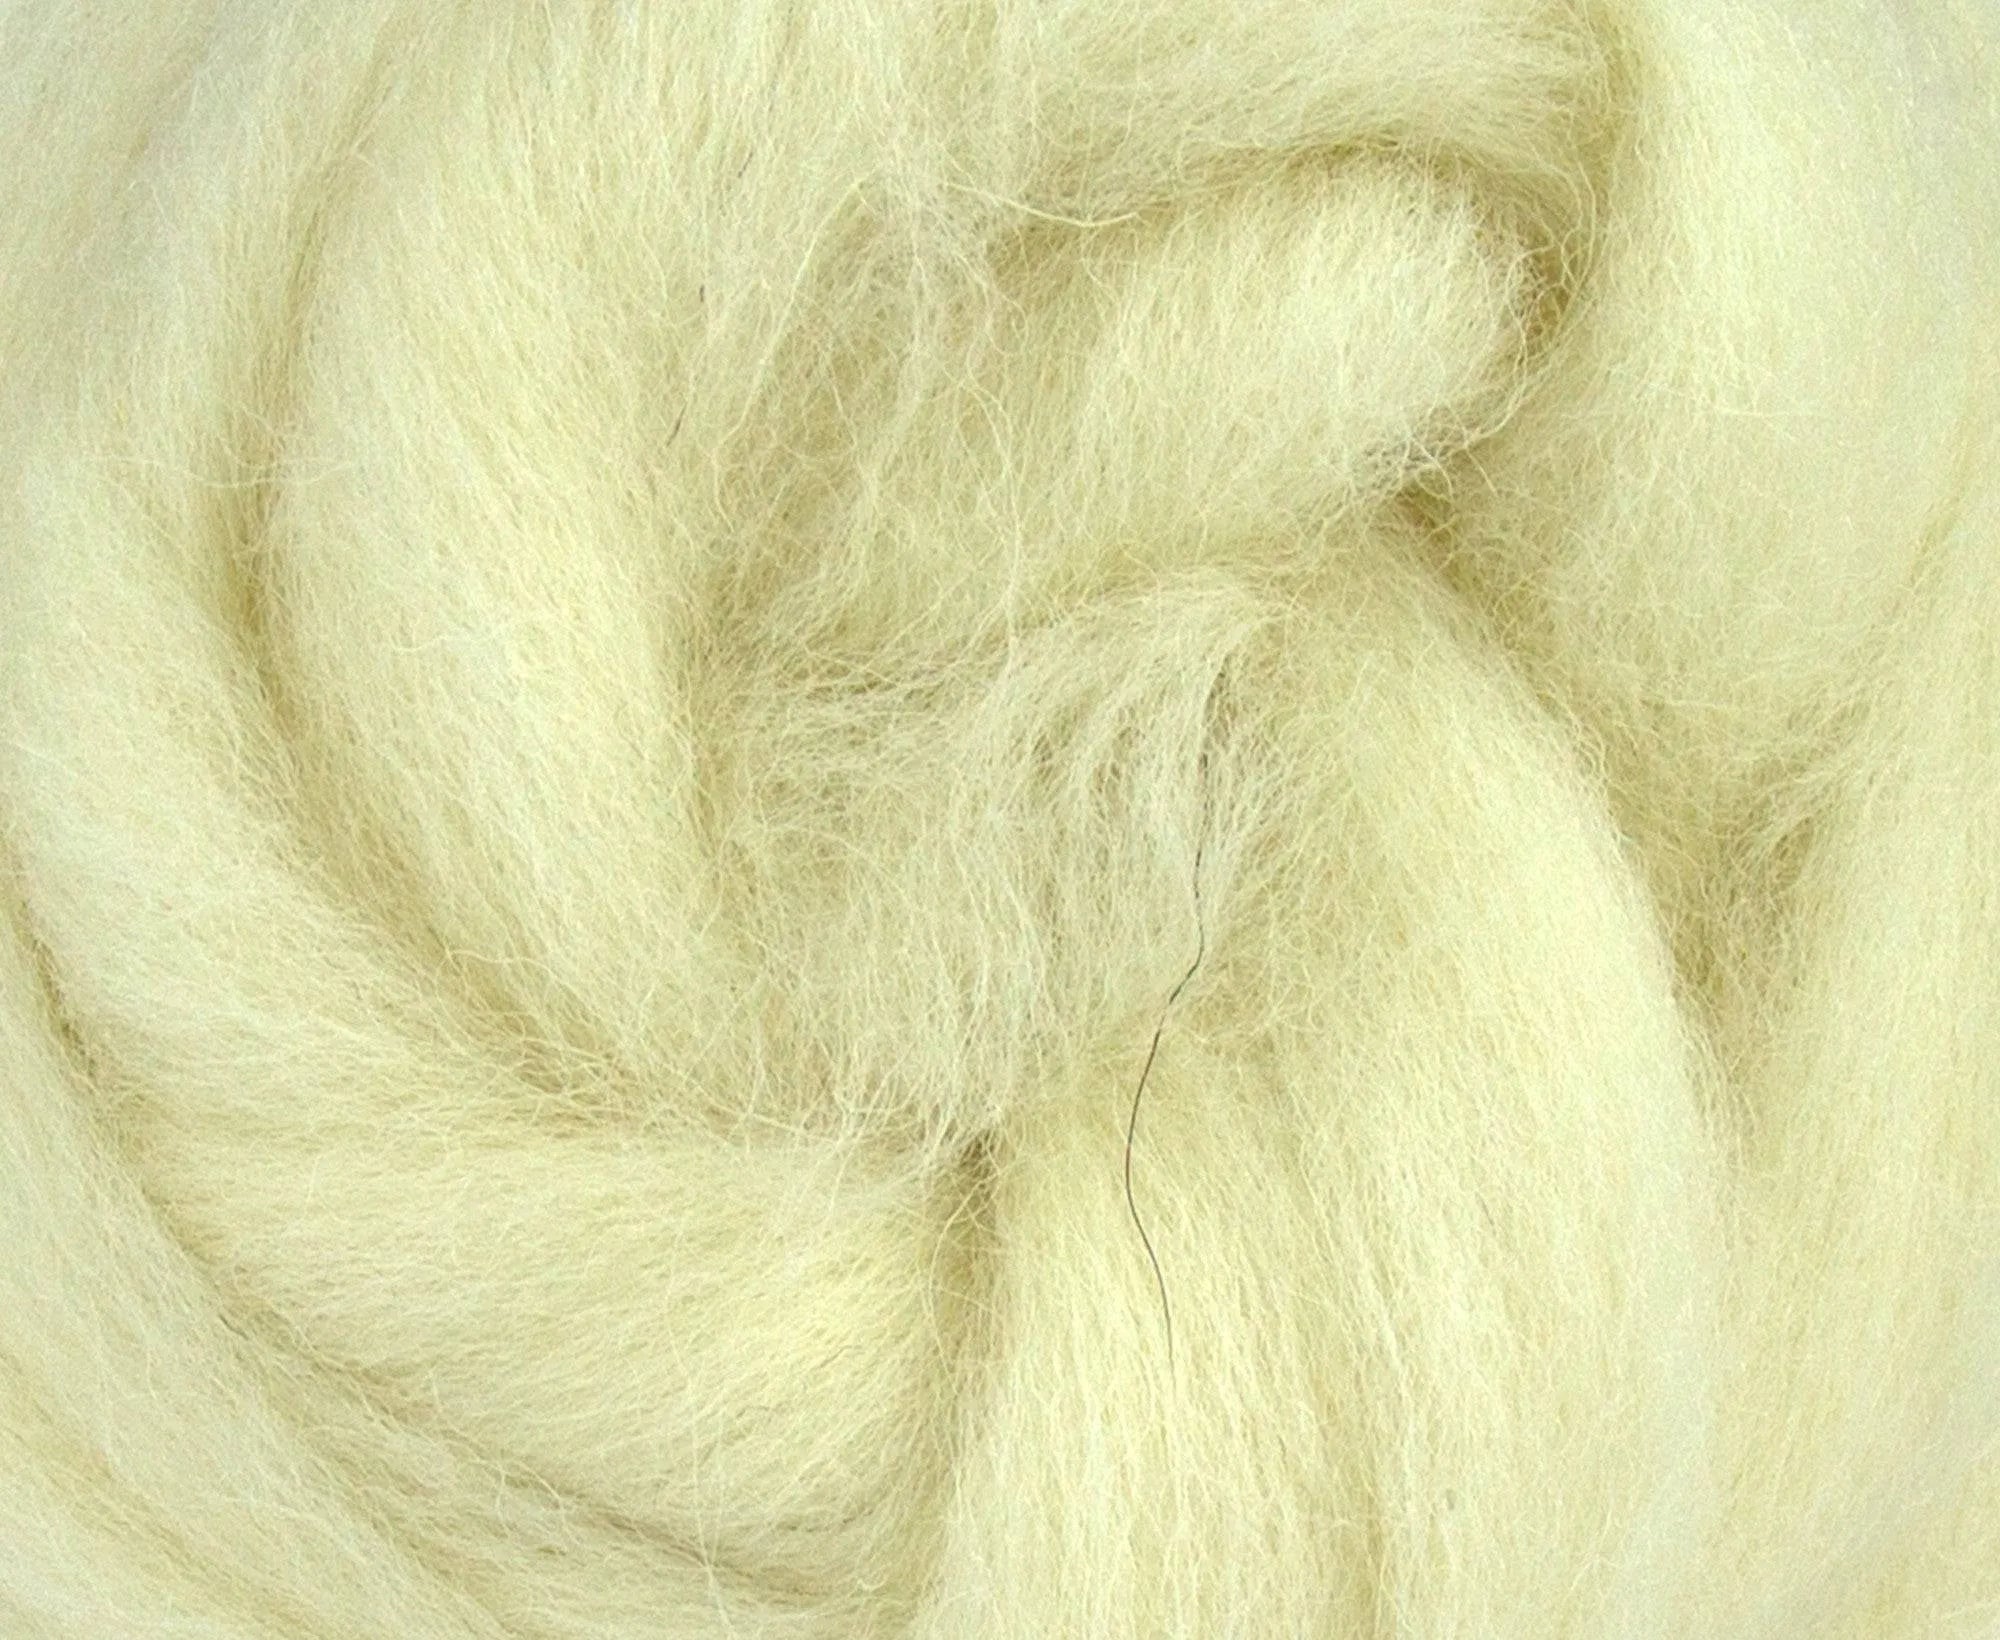 White Texel Top - World of Wool